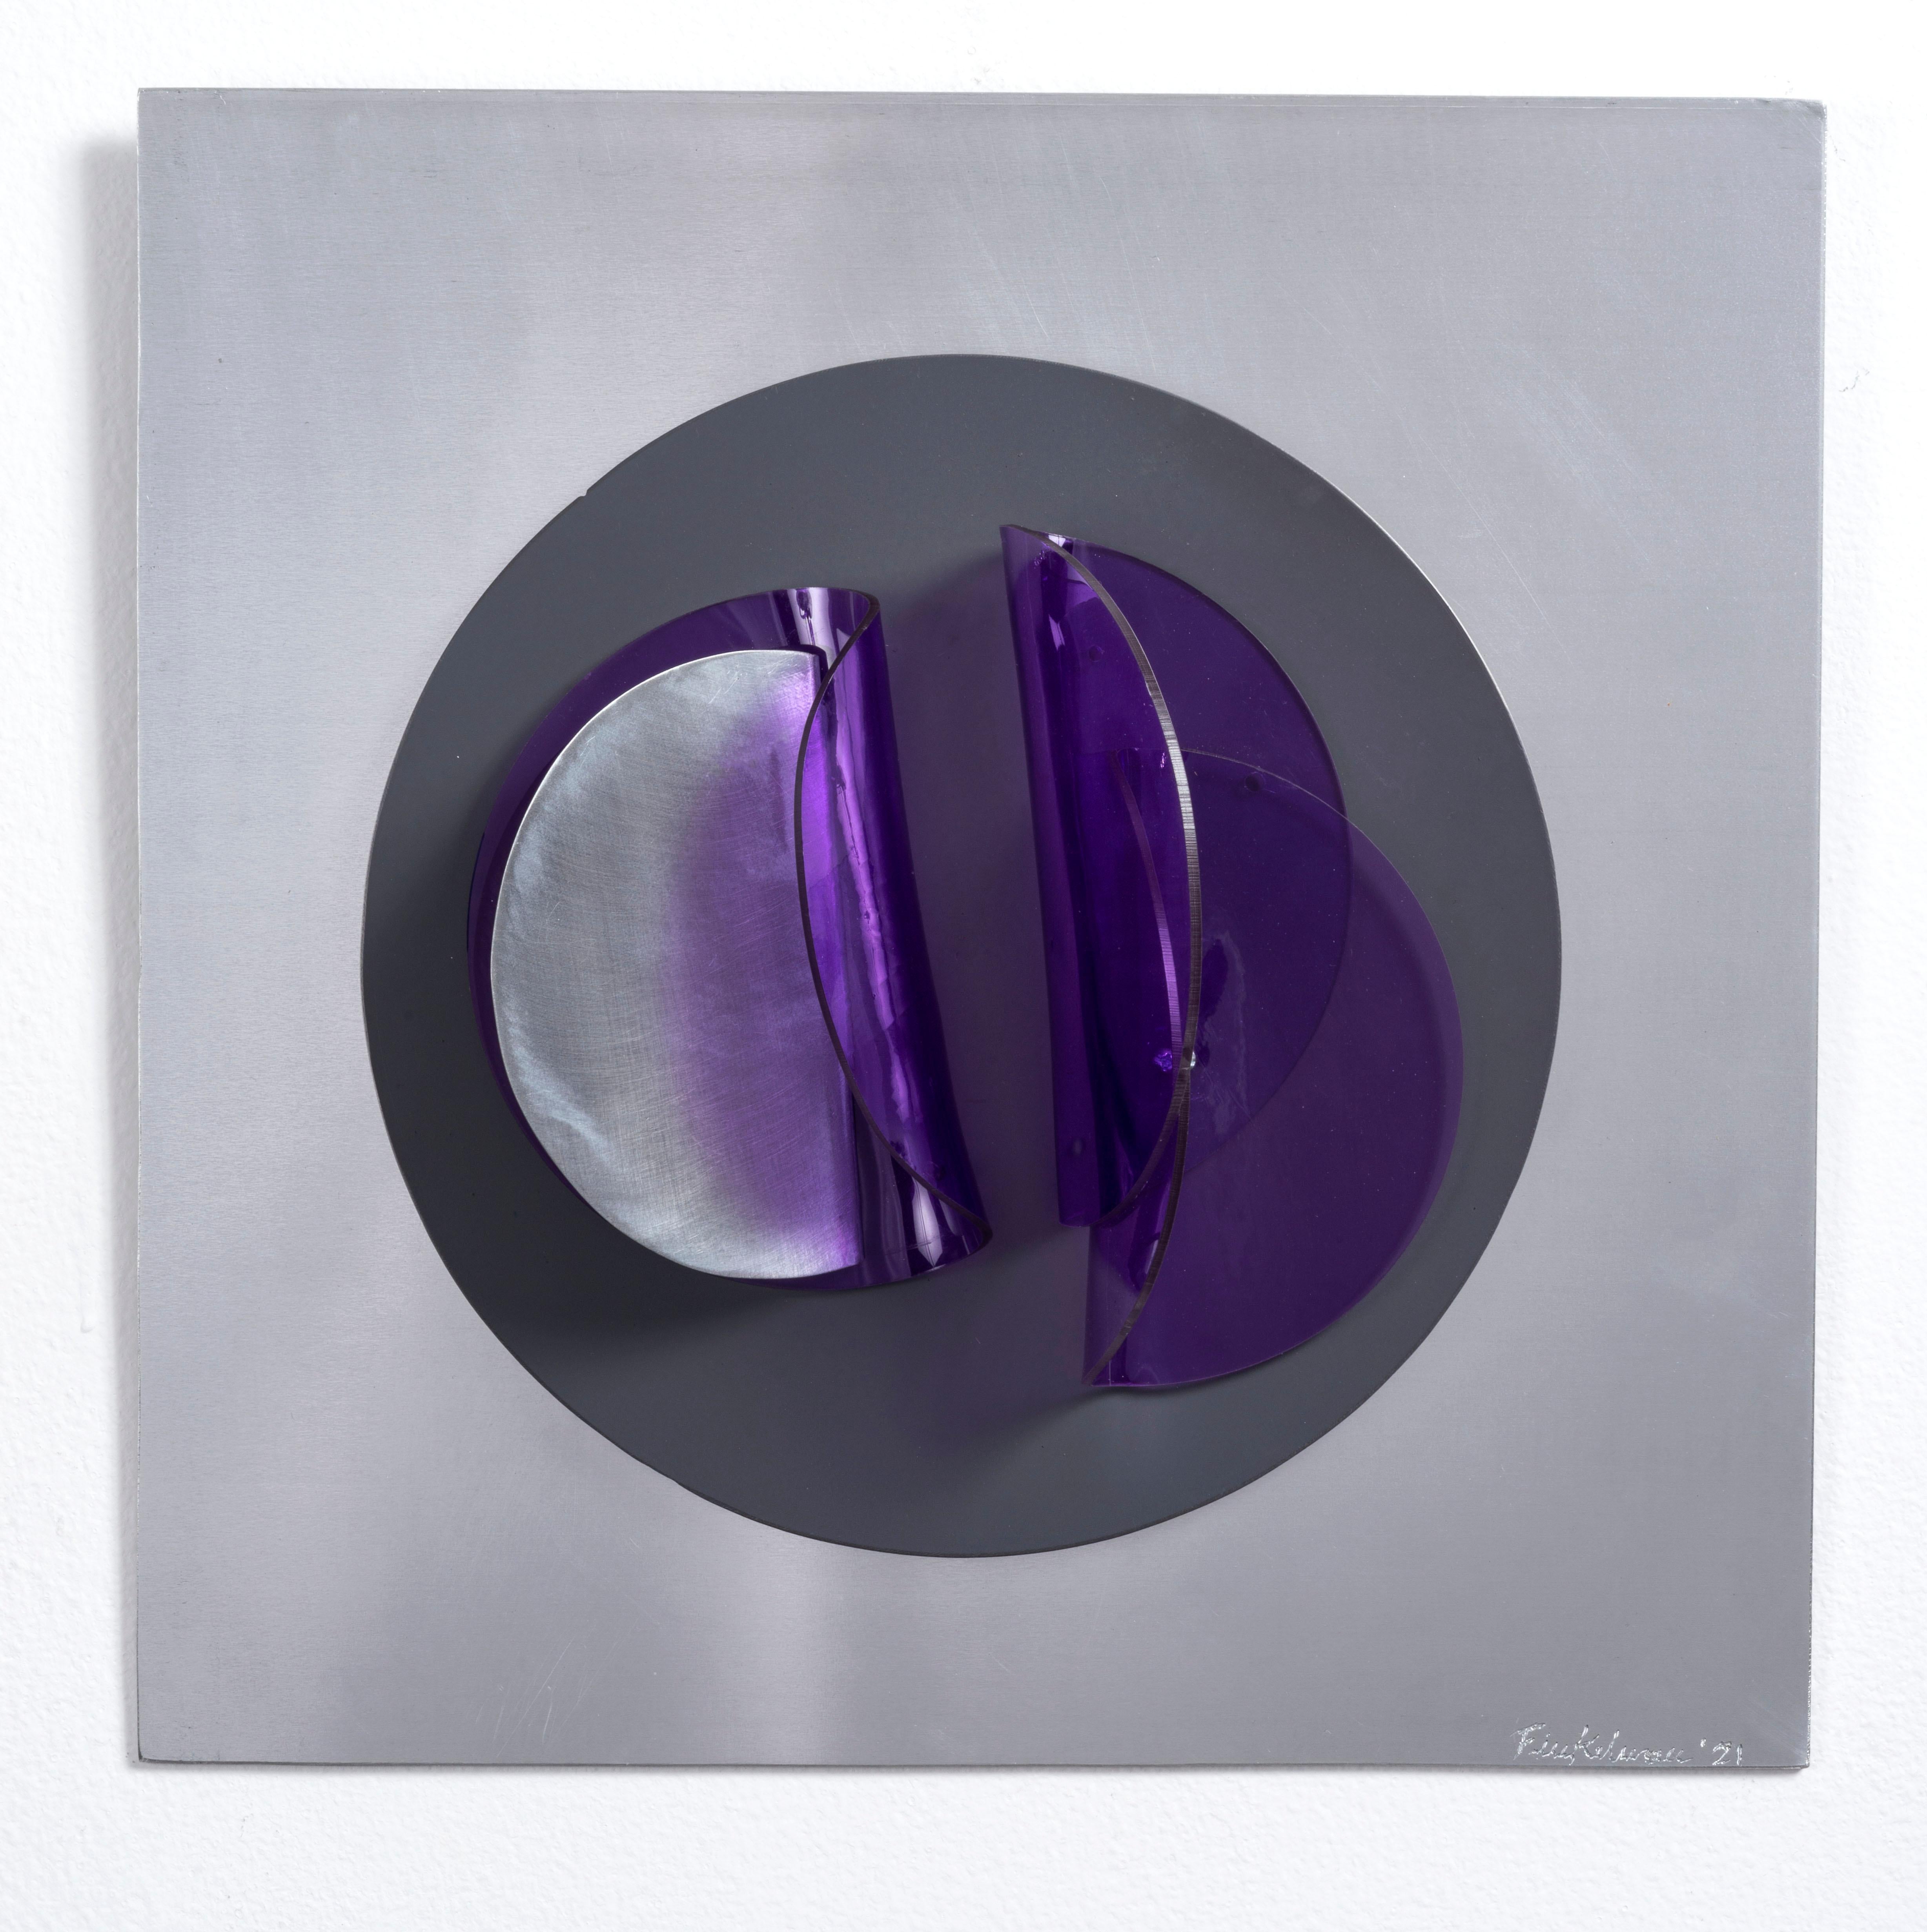 Assembler Violeta N° 1, 2 and 3 (Triptych). by Fanny Finkelman Szyller
Overall size: 40 H x 120 W x 14 D cm.

Individual size: 
Assembler  Violeta N°1:
Acrylics, aluminum, screws, and painted metal ring on aluminum
Dimensions:  40 H x 40 W x 8D